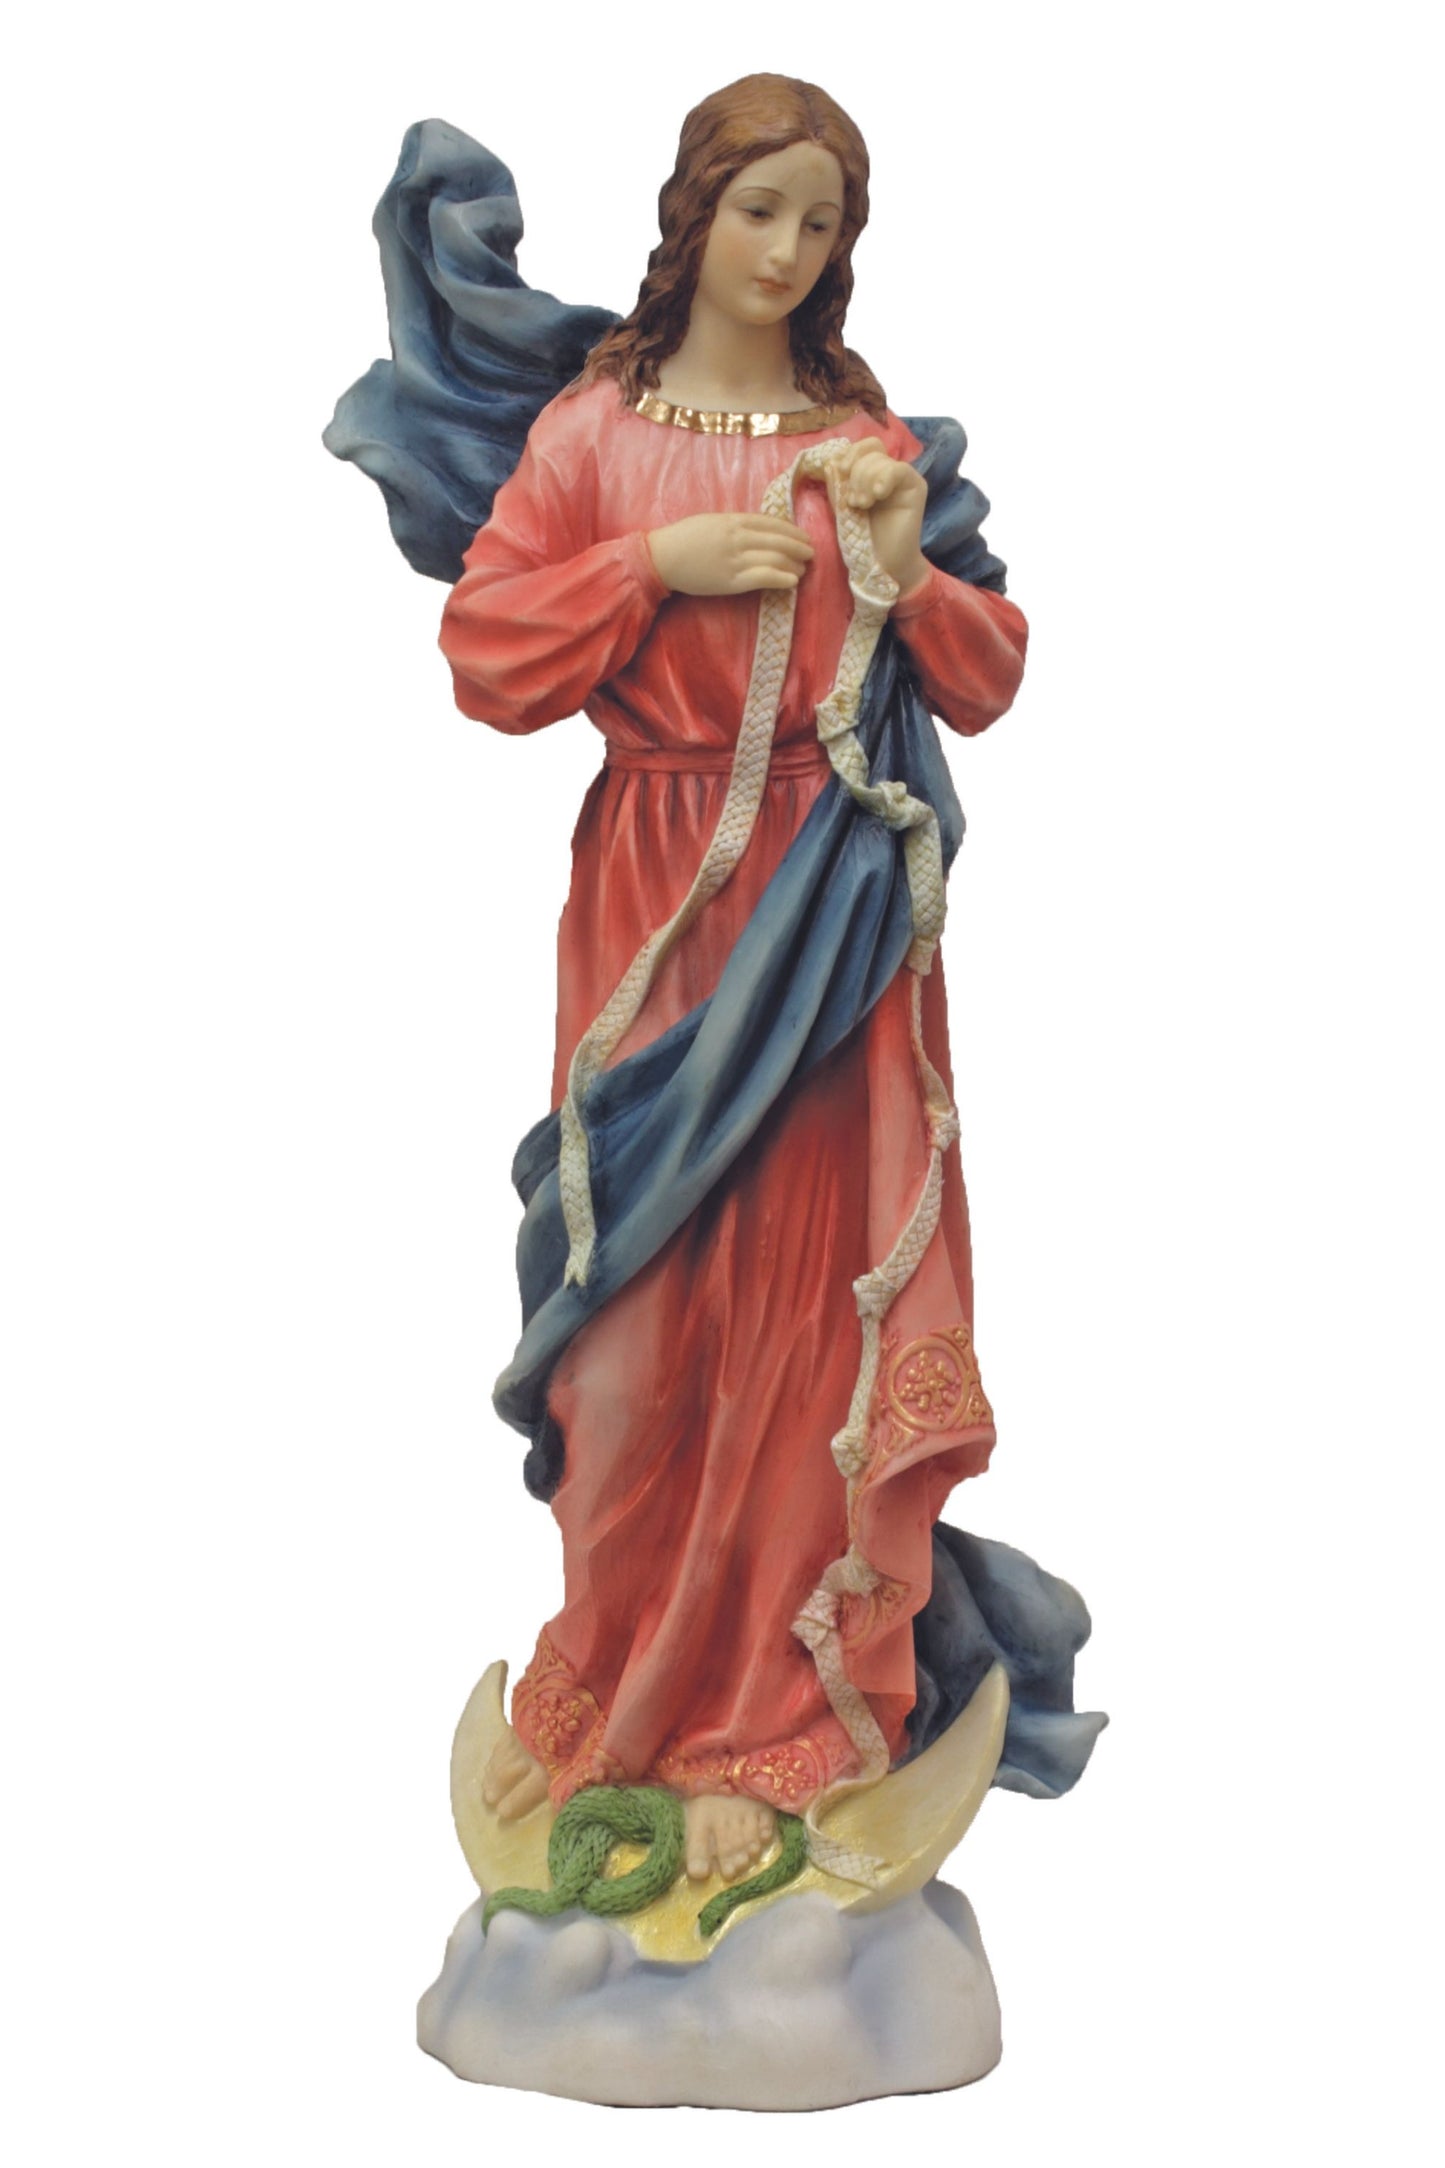 SR-76428-C Our Lady Undoer of Knots in Color 12"